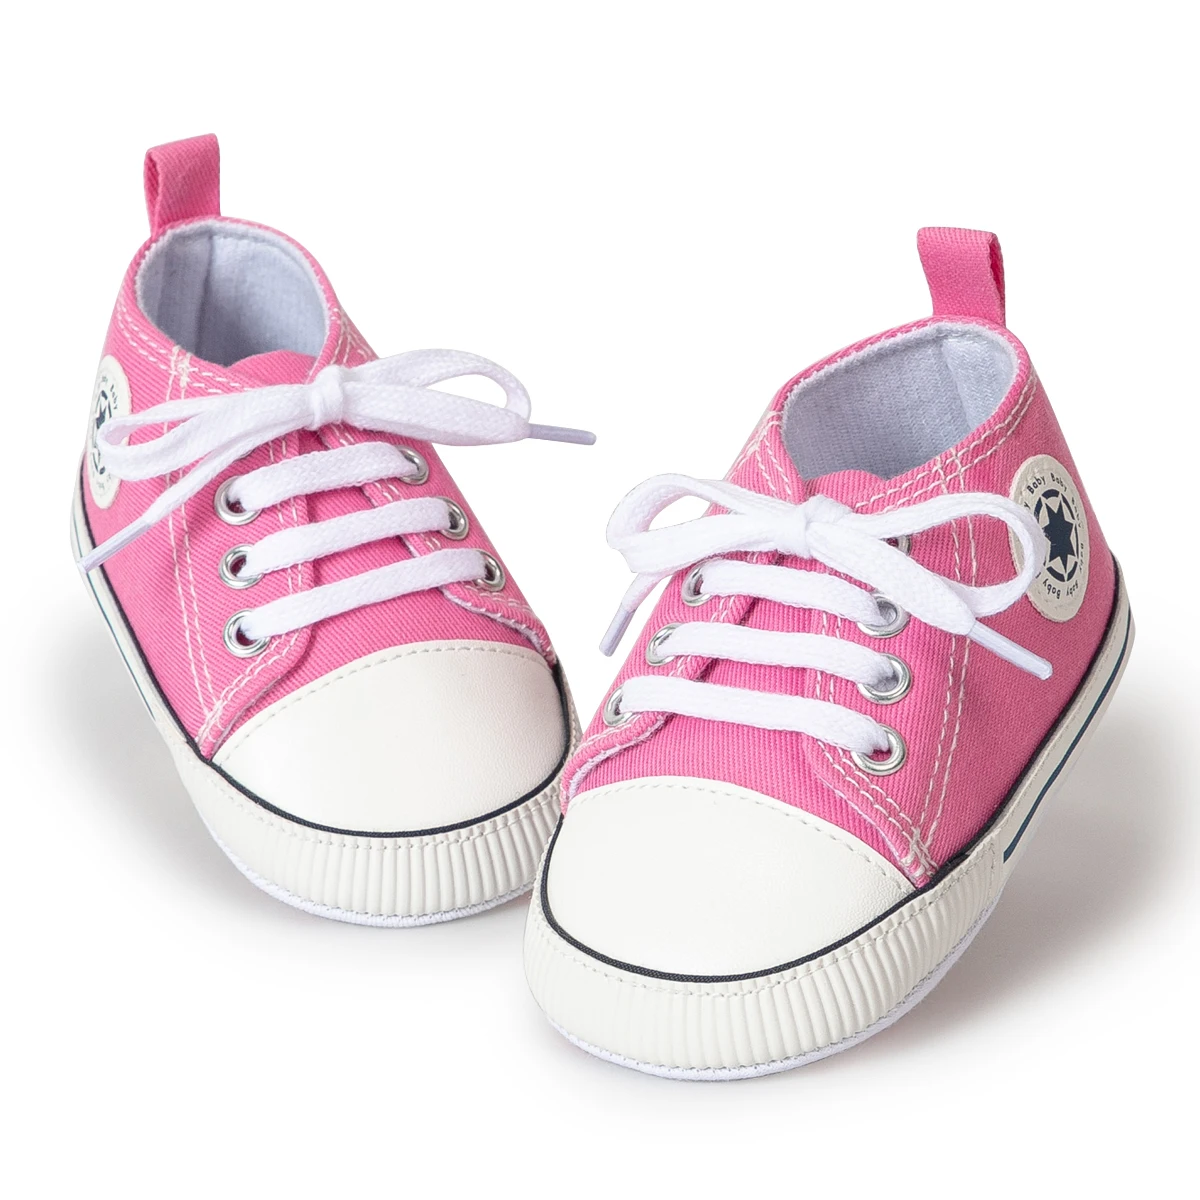 New arrival Four Seasons Unisex boy and girl Canvas casual shoes Soft sole anti slip Baby sneaker